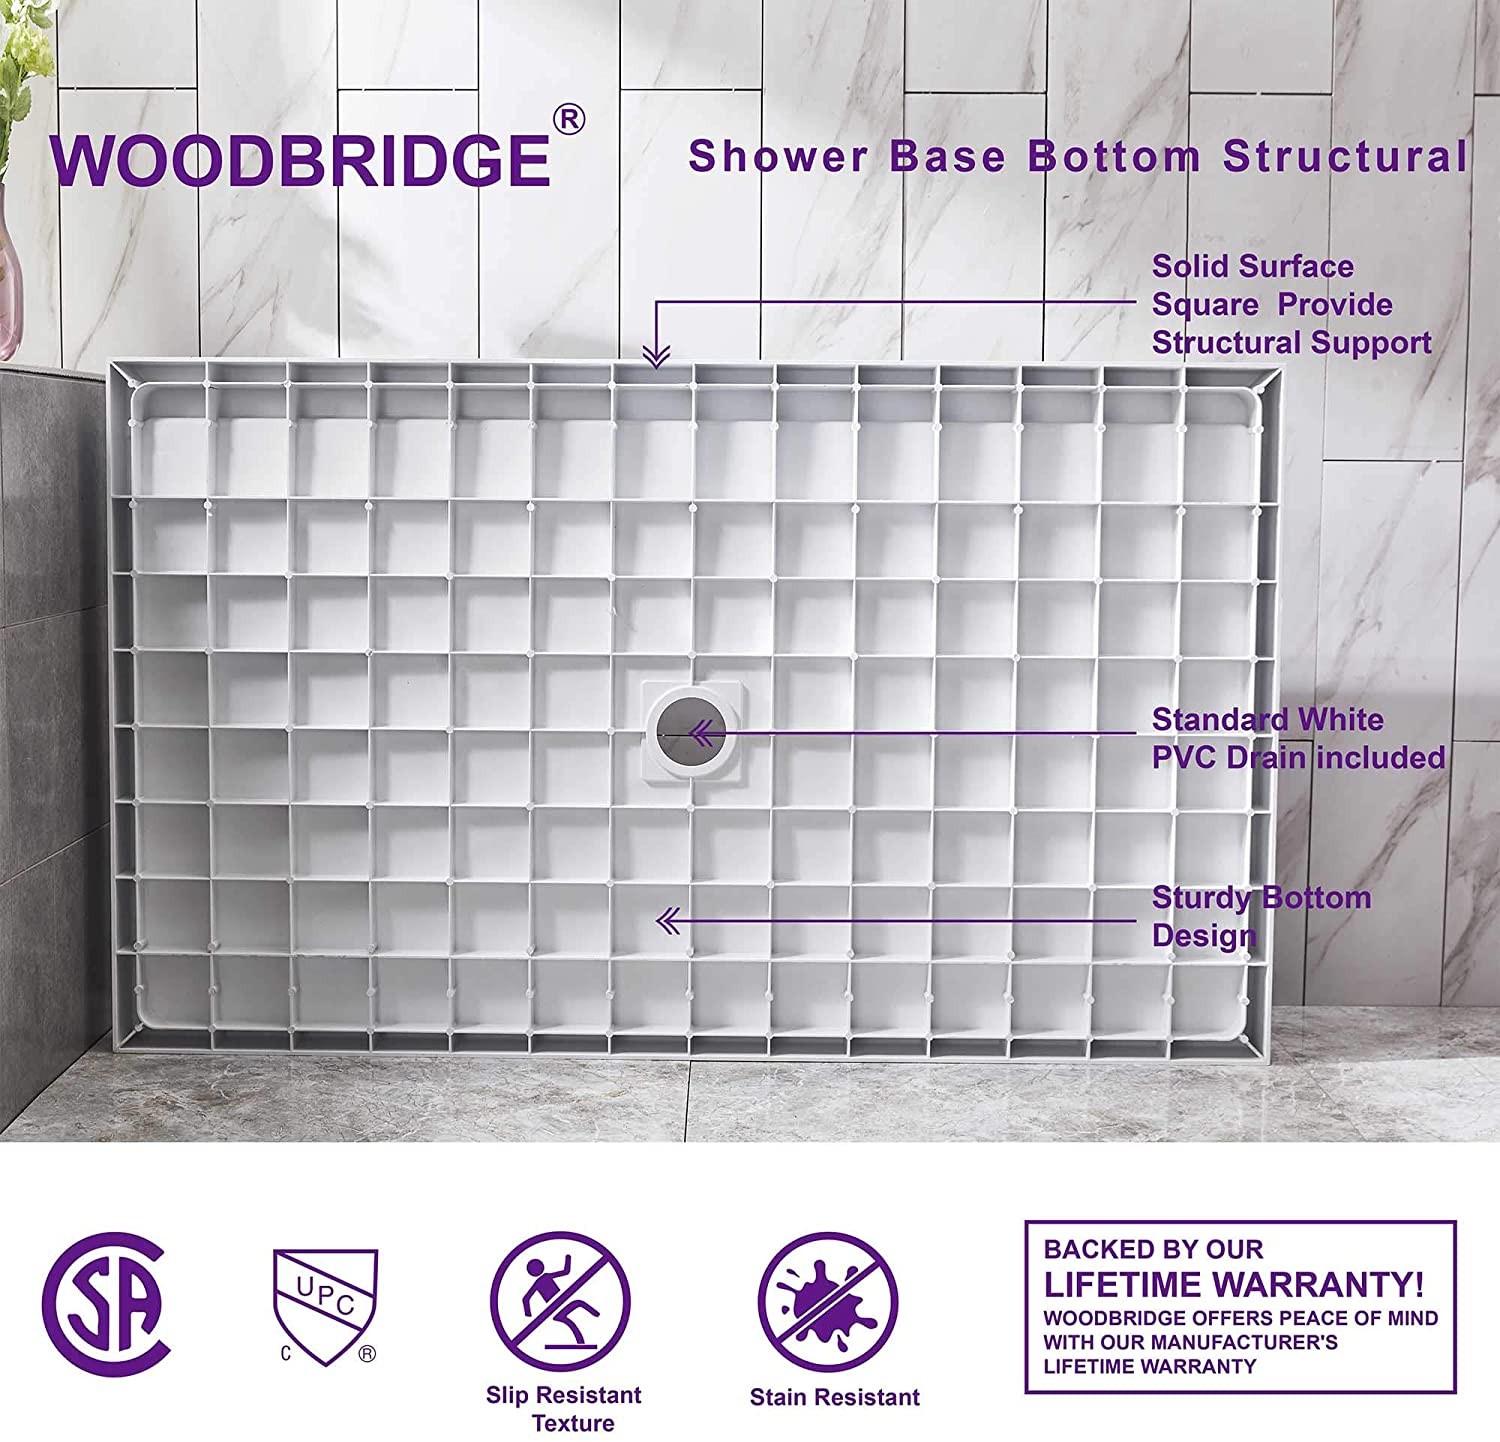  WOODBRIDGE SBR4836-1000C-MB SolidSurface Shower Base with Recessed Trench Side Including Matte Black Linear Cover, 48